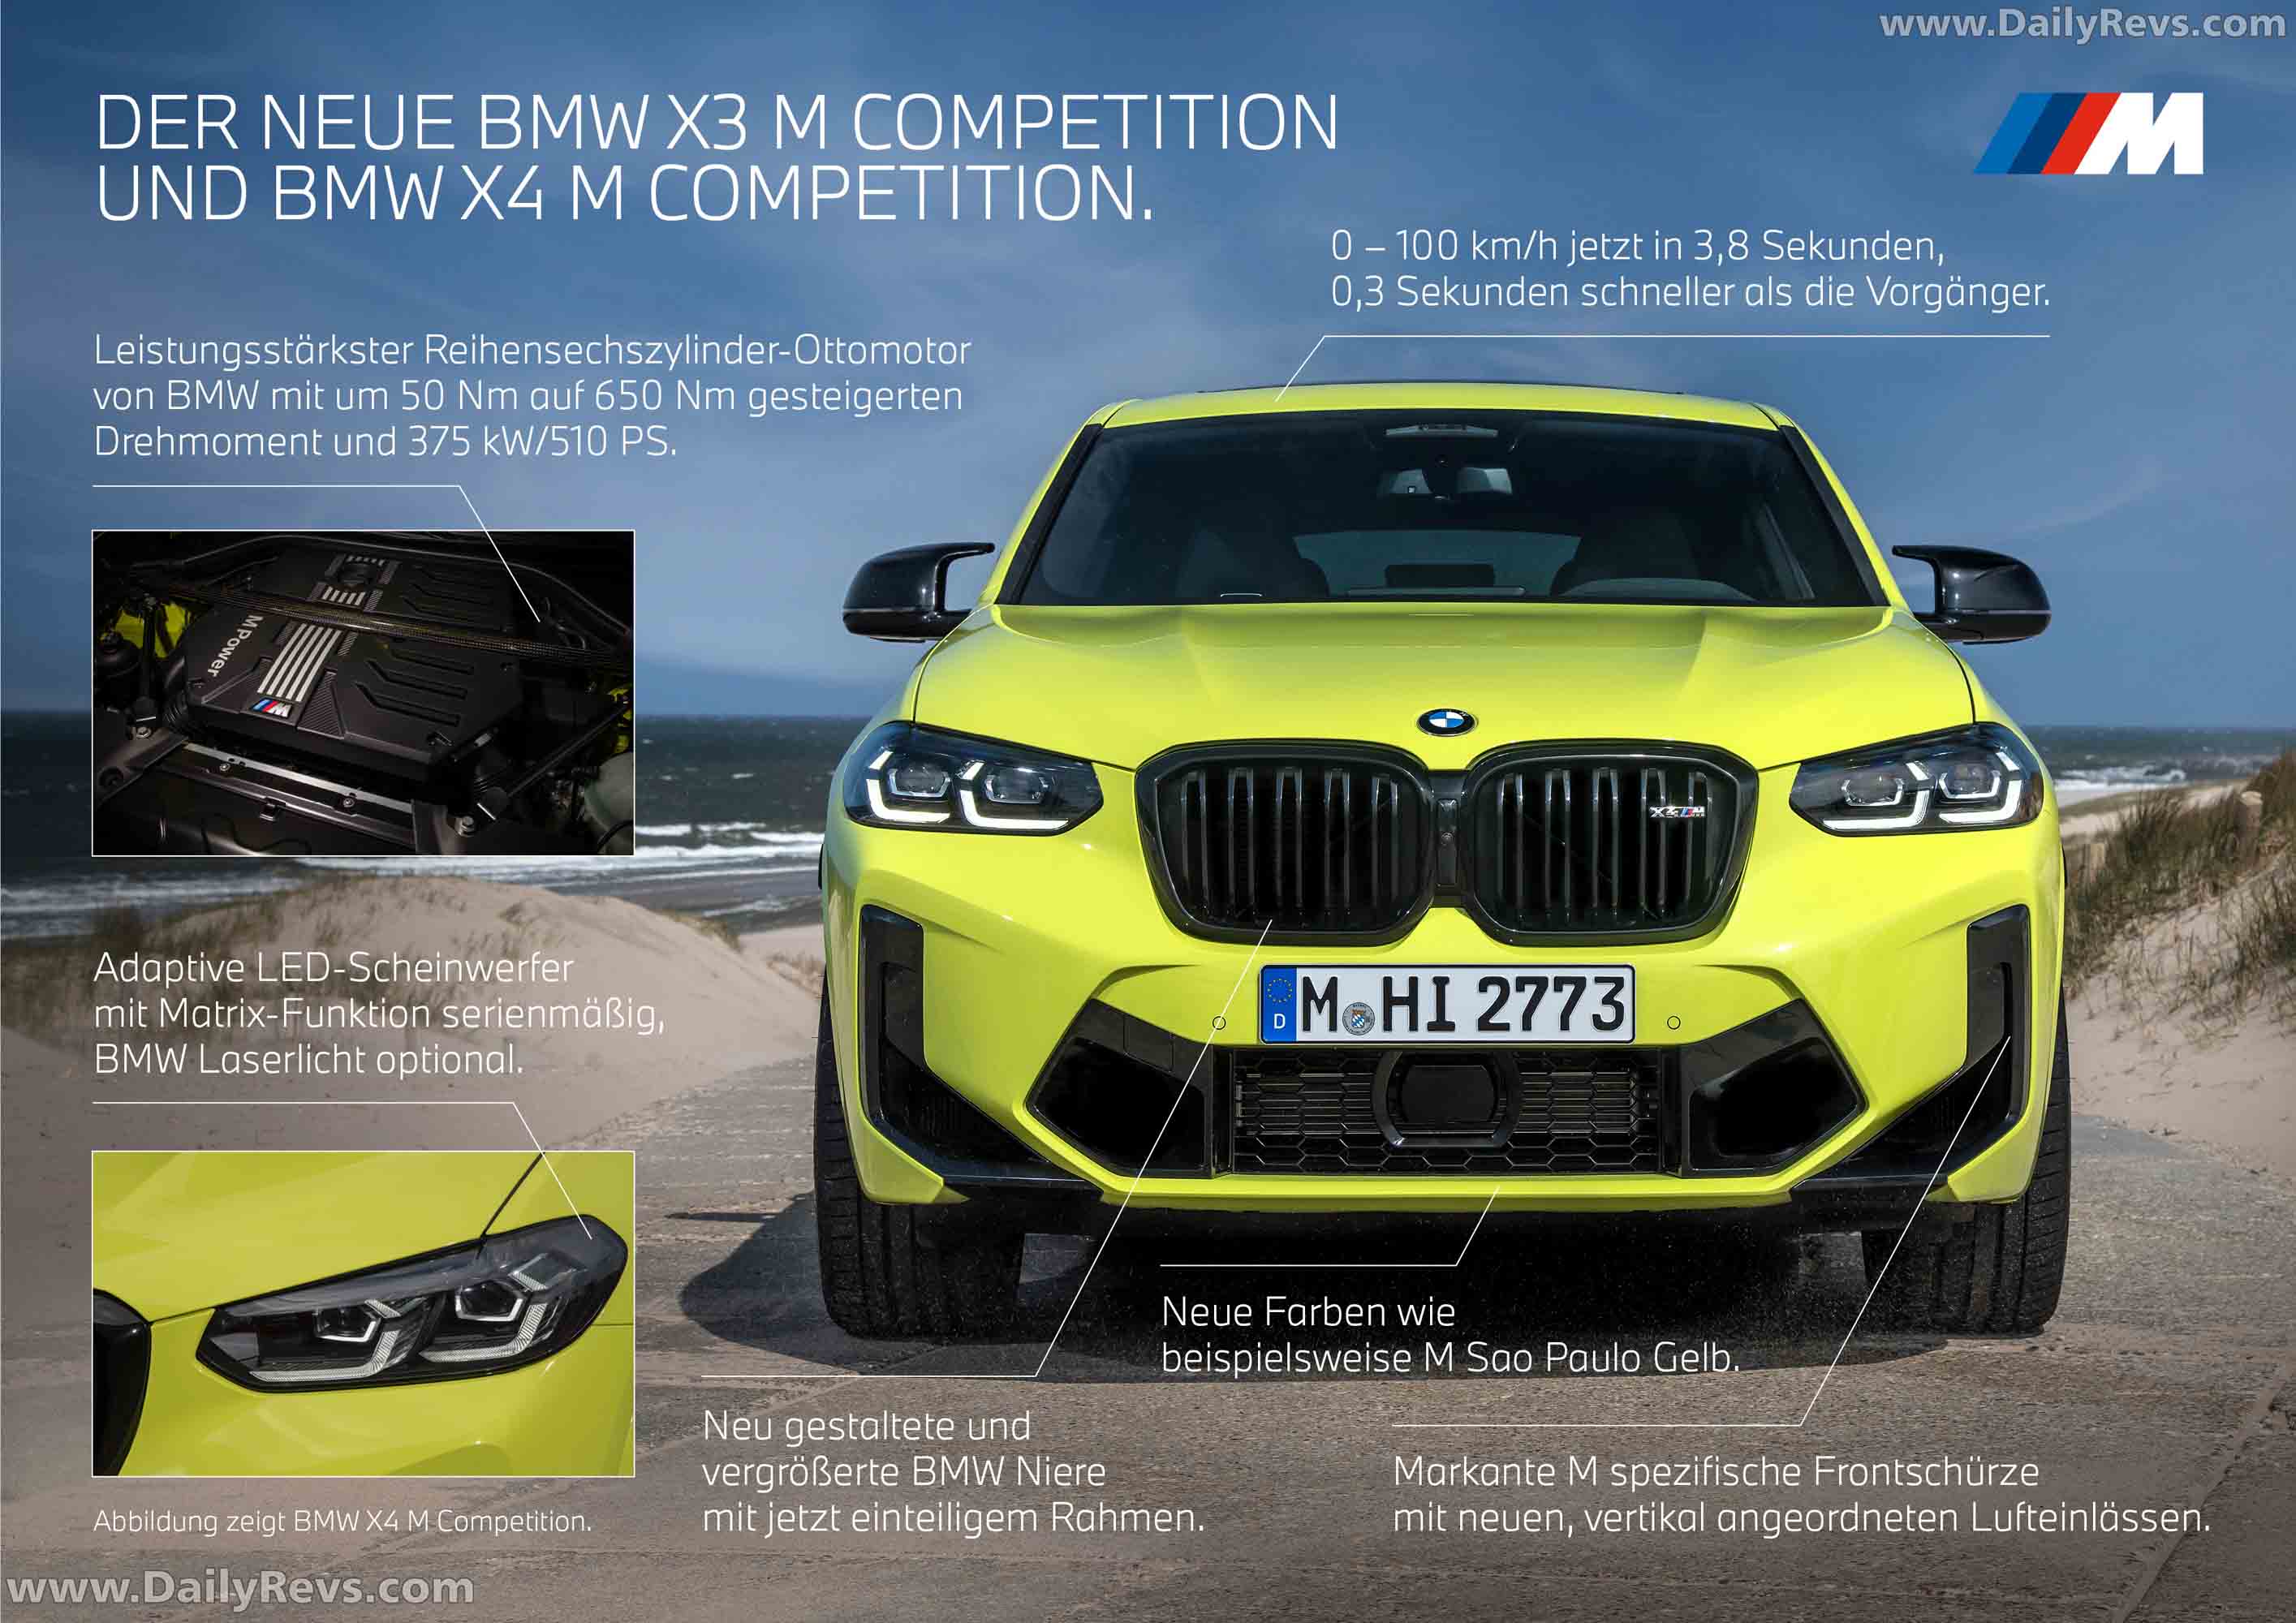 2022 BMW X4 M Competition - Dailyrevs